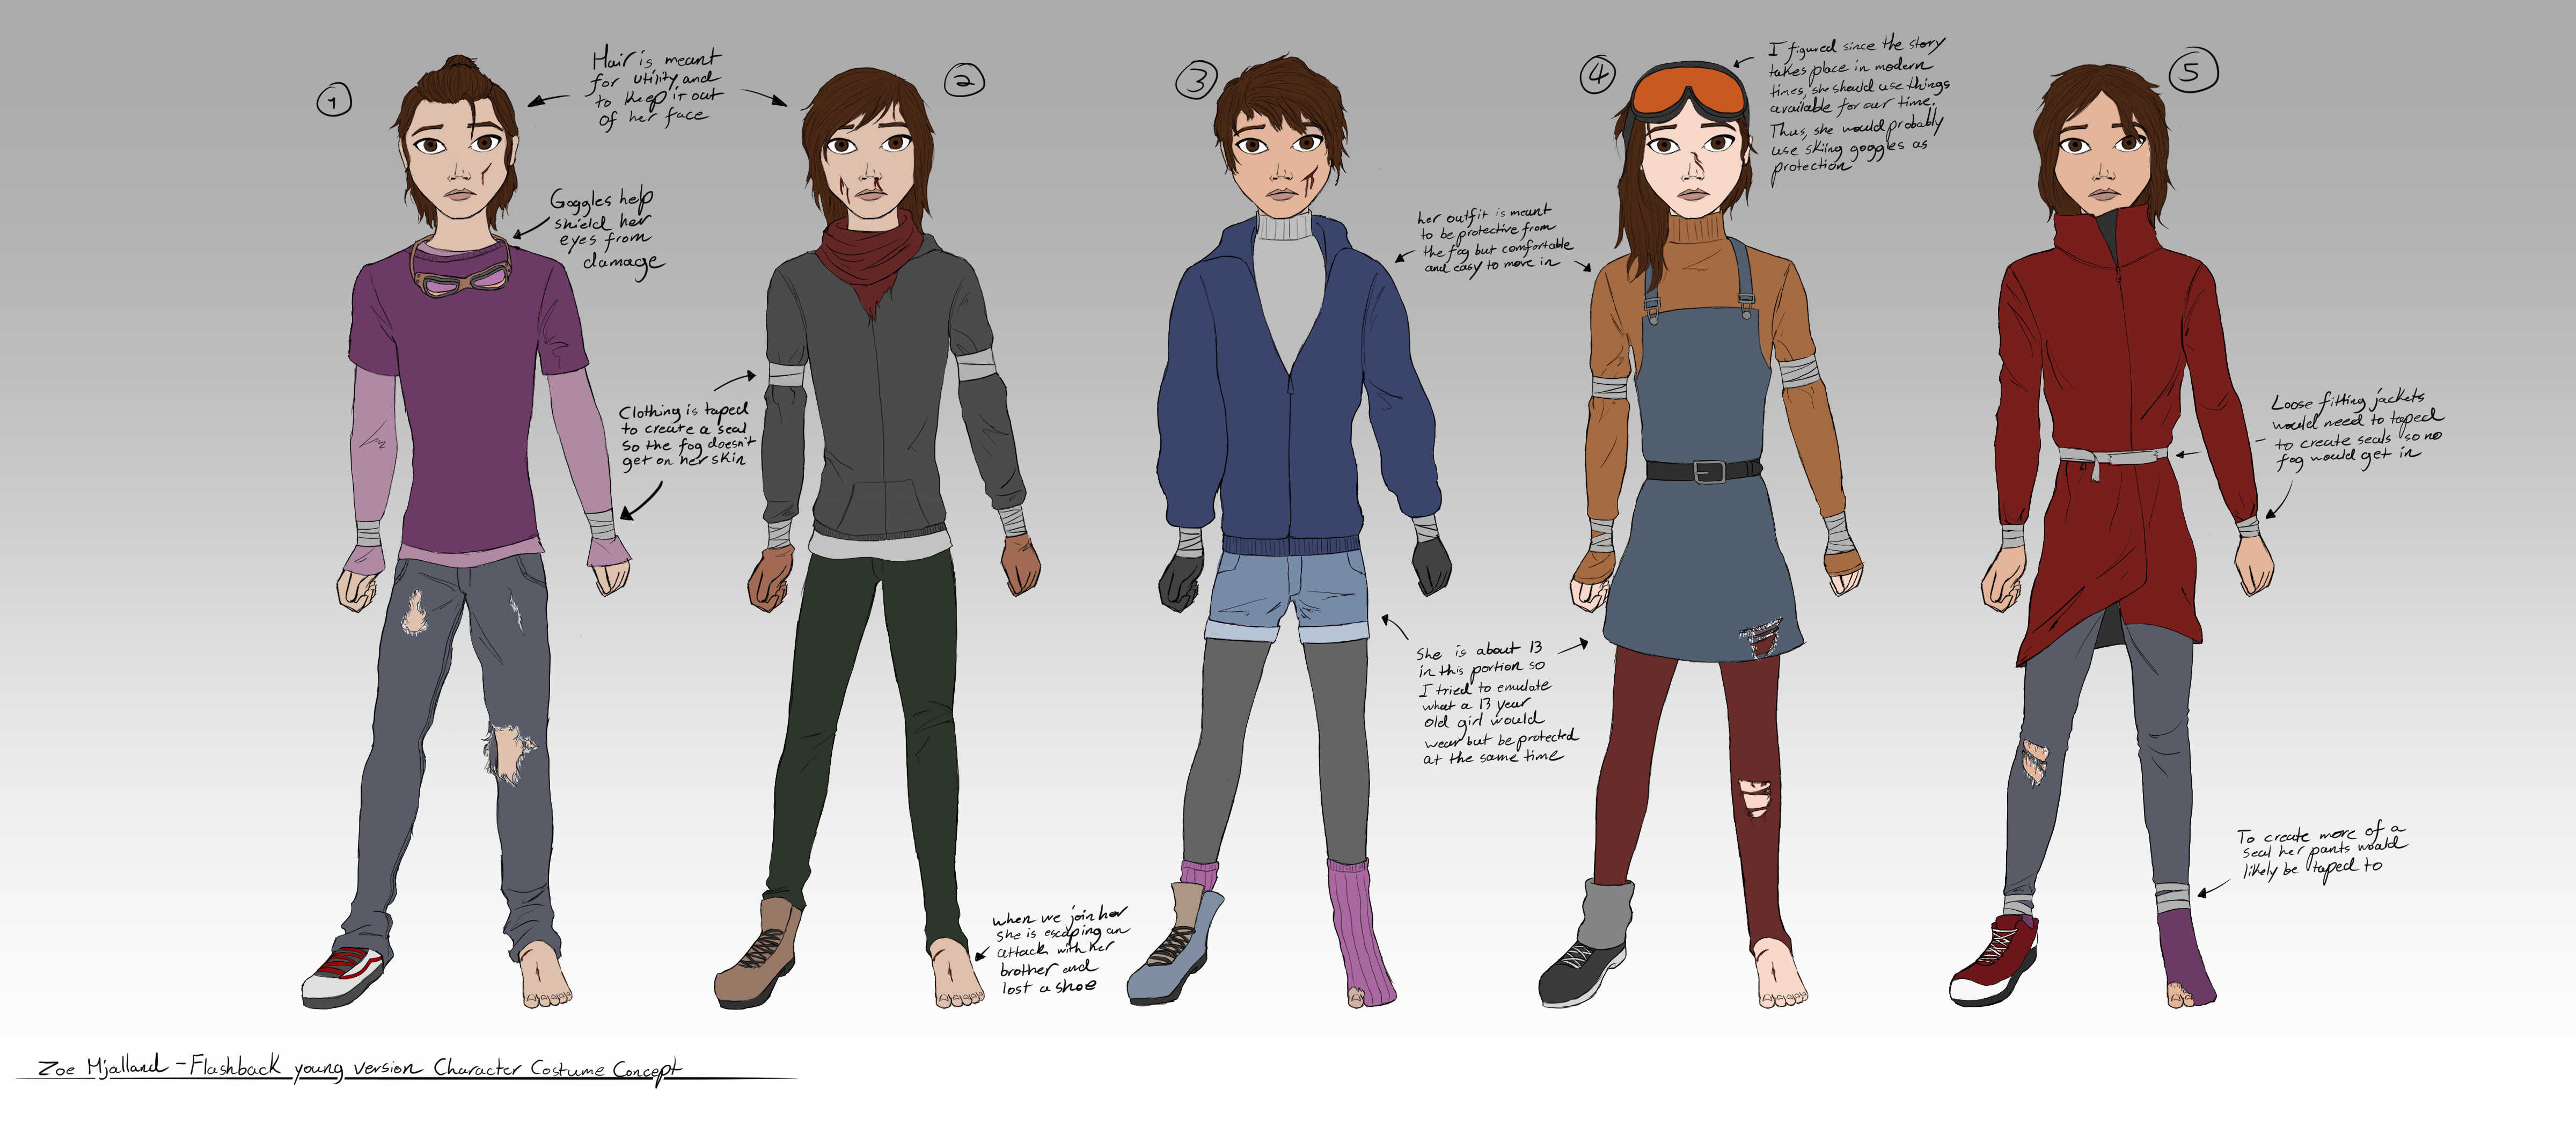 Main character 1 young version costume exploration